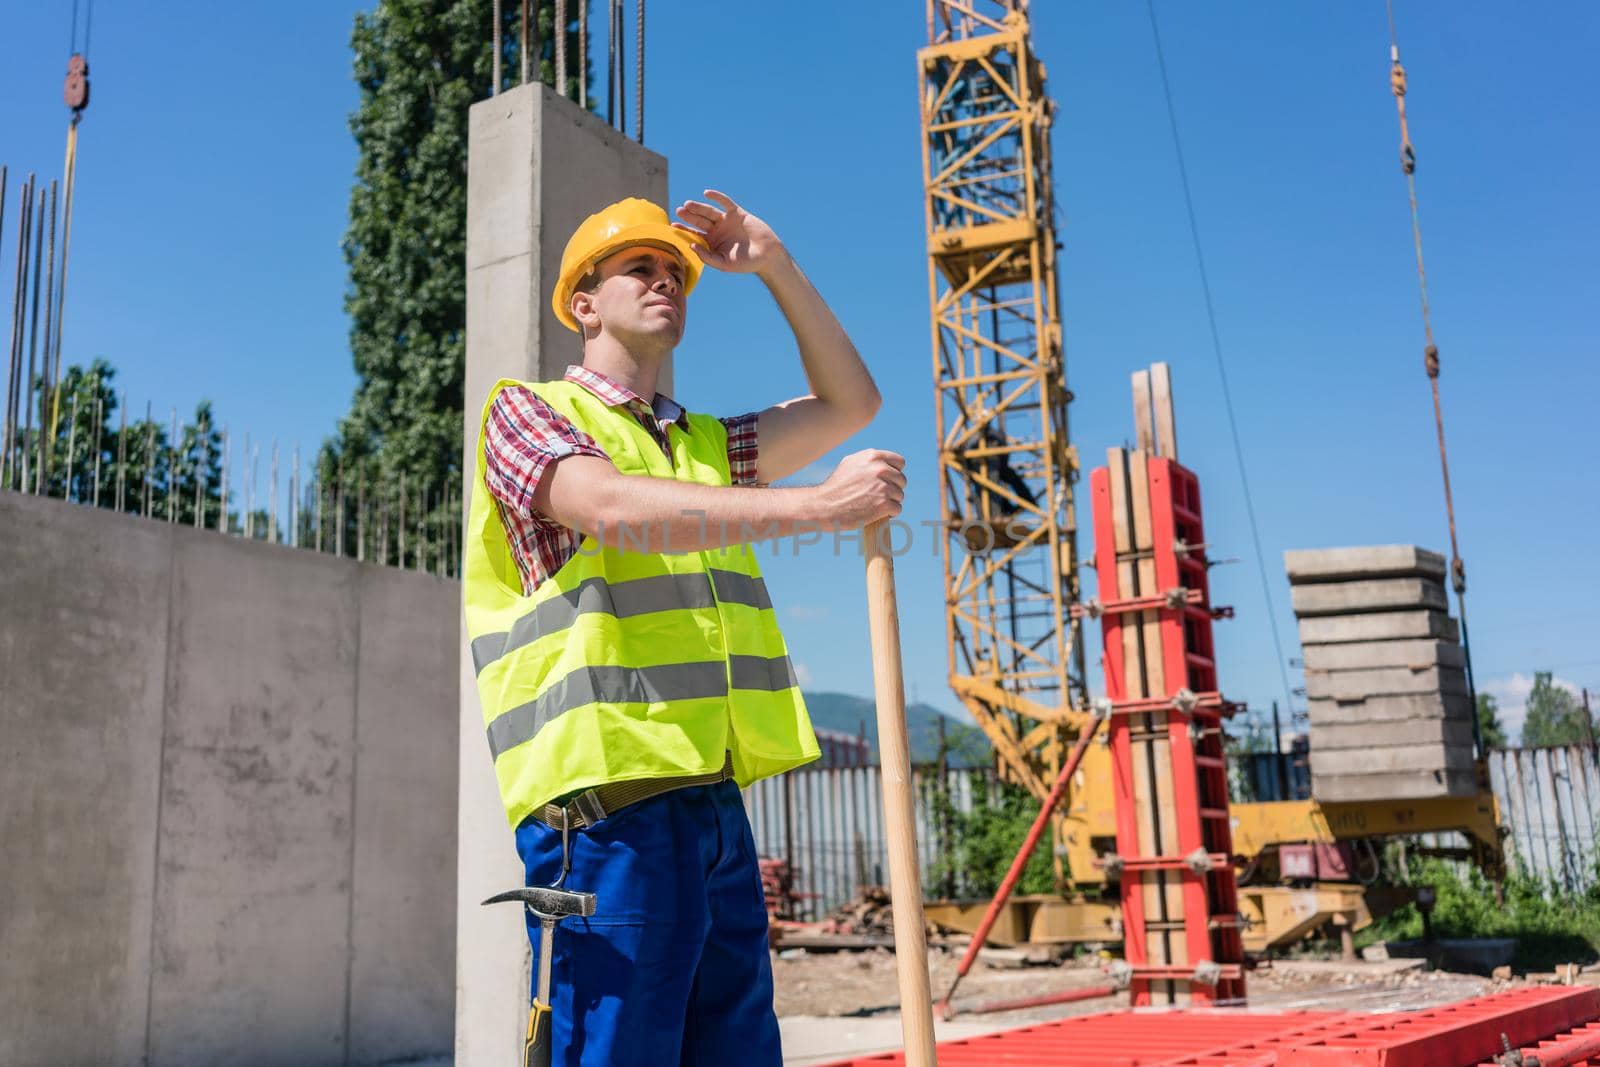 Young blue-collar worker looking up with a worried facial expression while wearing safety equipment during work on the construction site in a sunny day